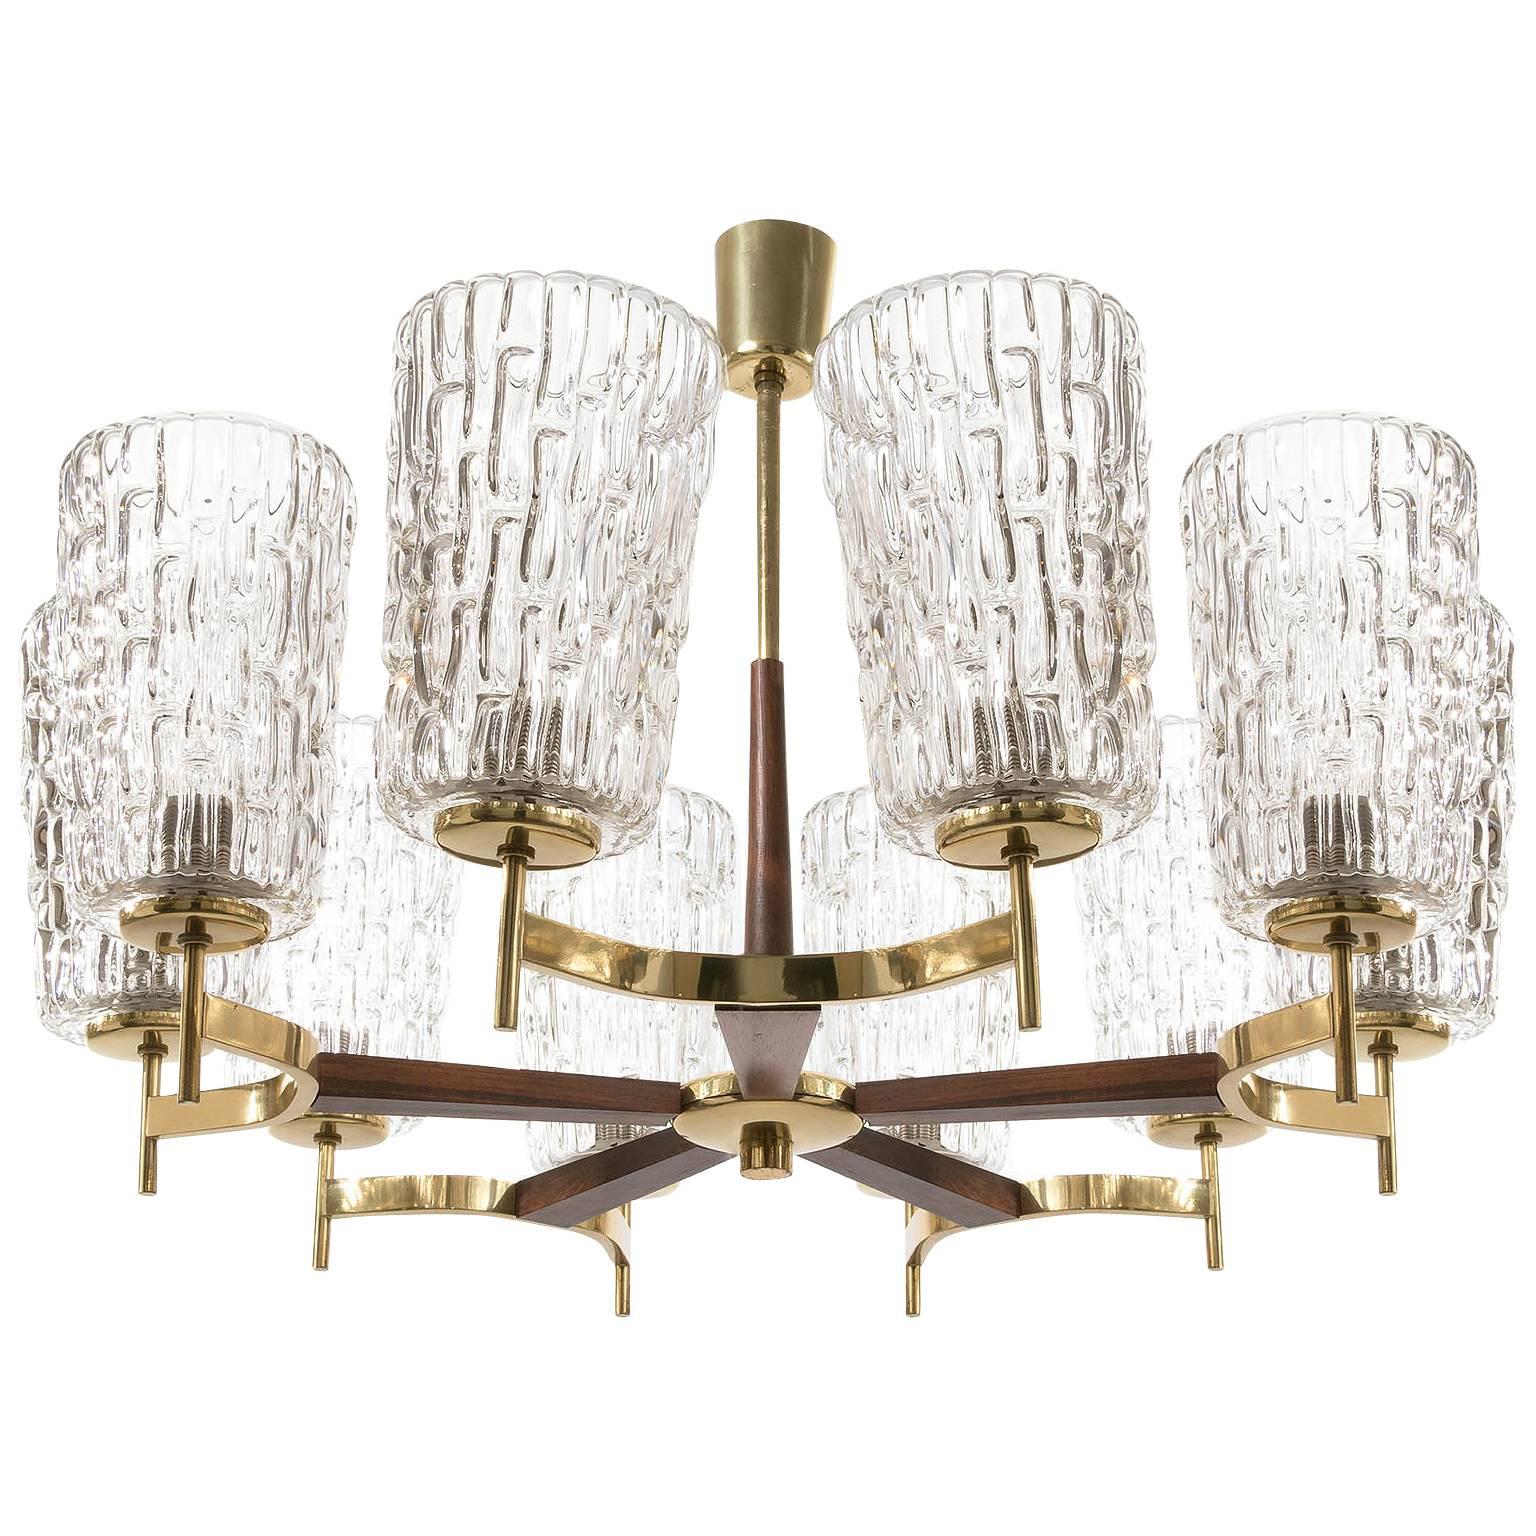 Pair of Large Chandeliers by Rupert Nikoll, Brass Wood and Glass, Austria, 1960